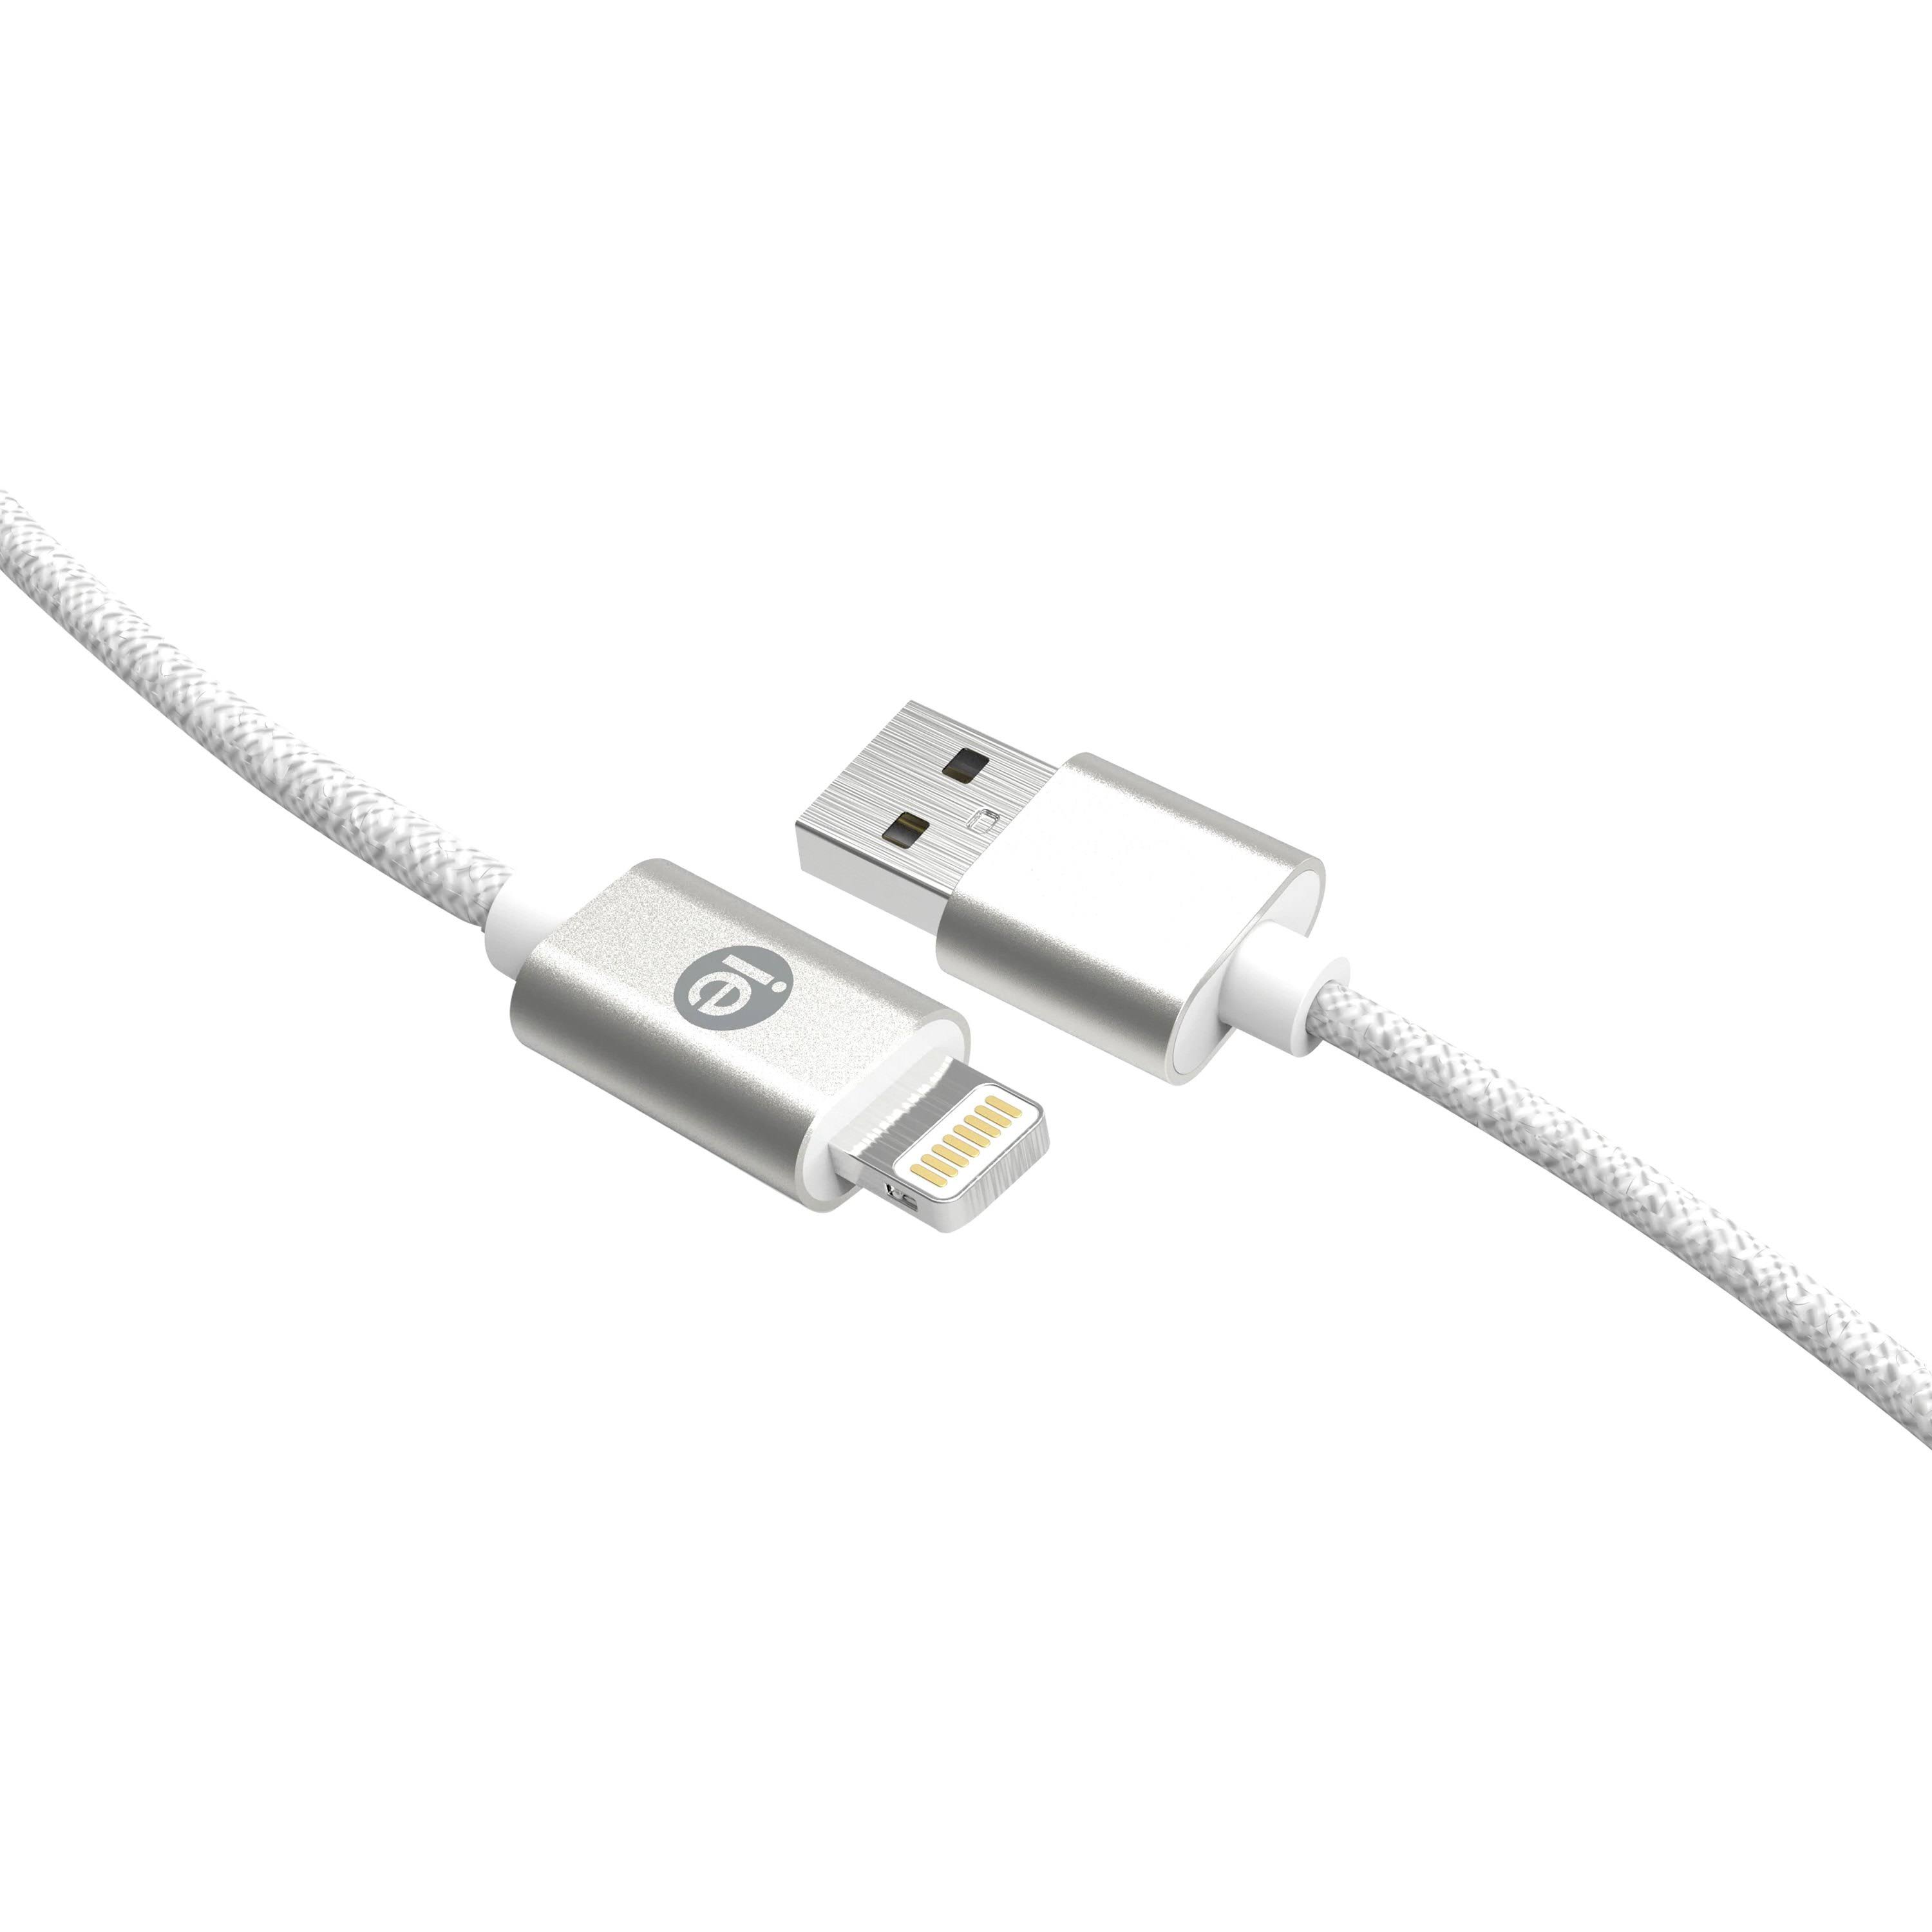 Iessentials Ien-Bc6L-Wt Charge & Sync Braided Lightning To USB Cable, 6Ft (White)